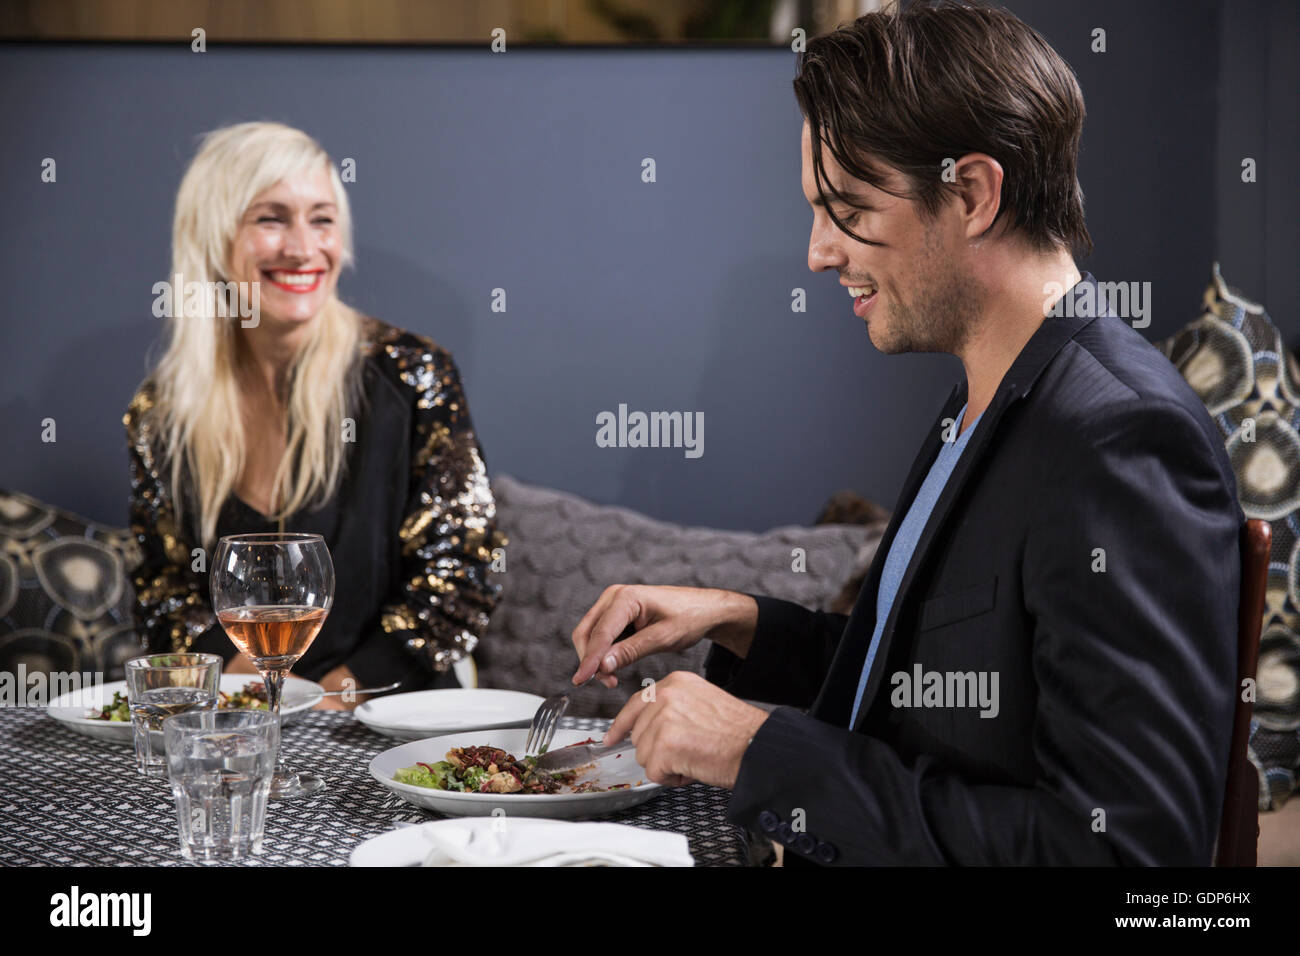 Couple on date dining in restaurant Stock Photo